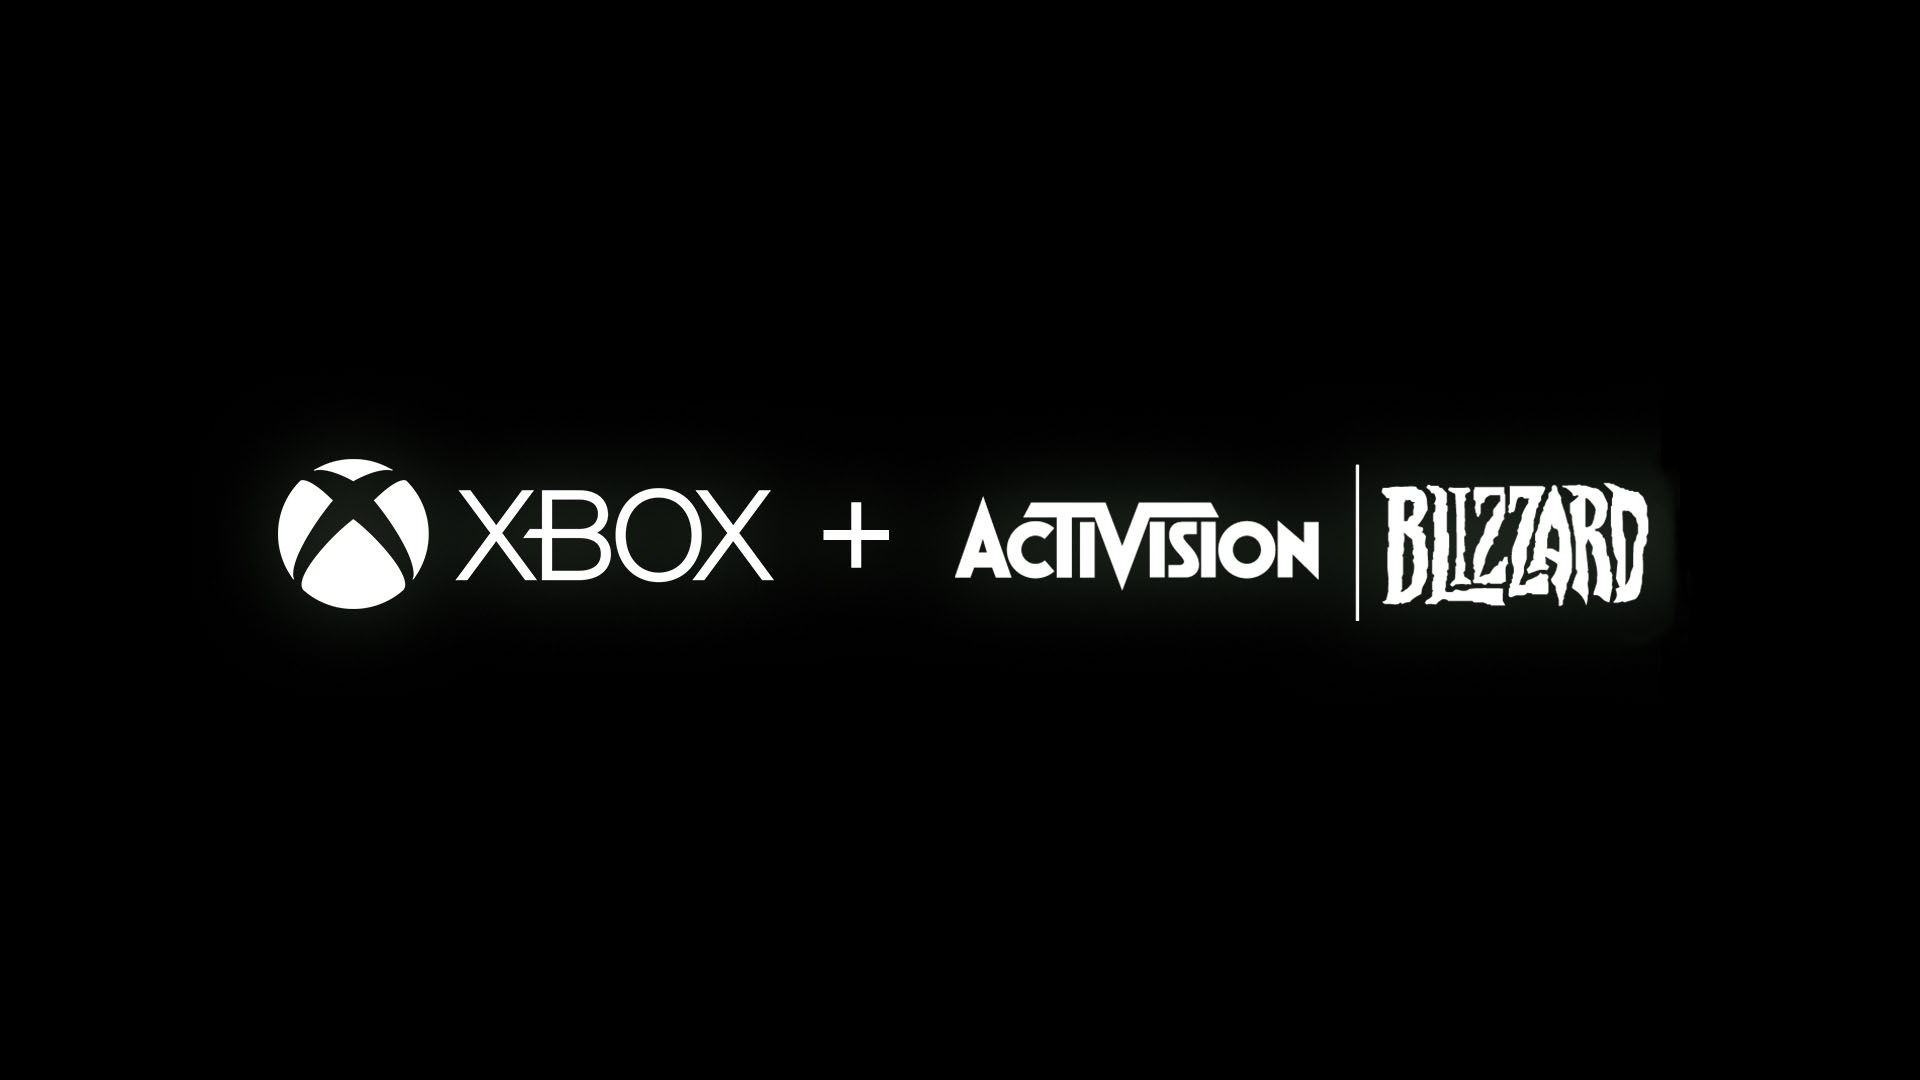 Labor organizations support Microsoft and Activision-Blizzard acquisition